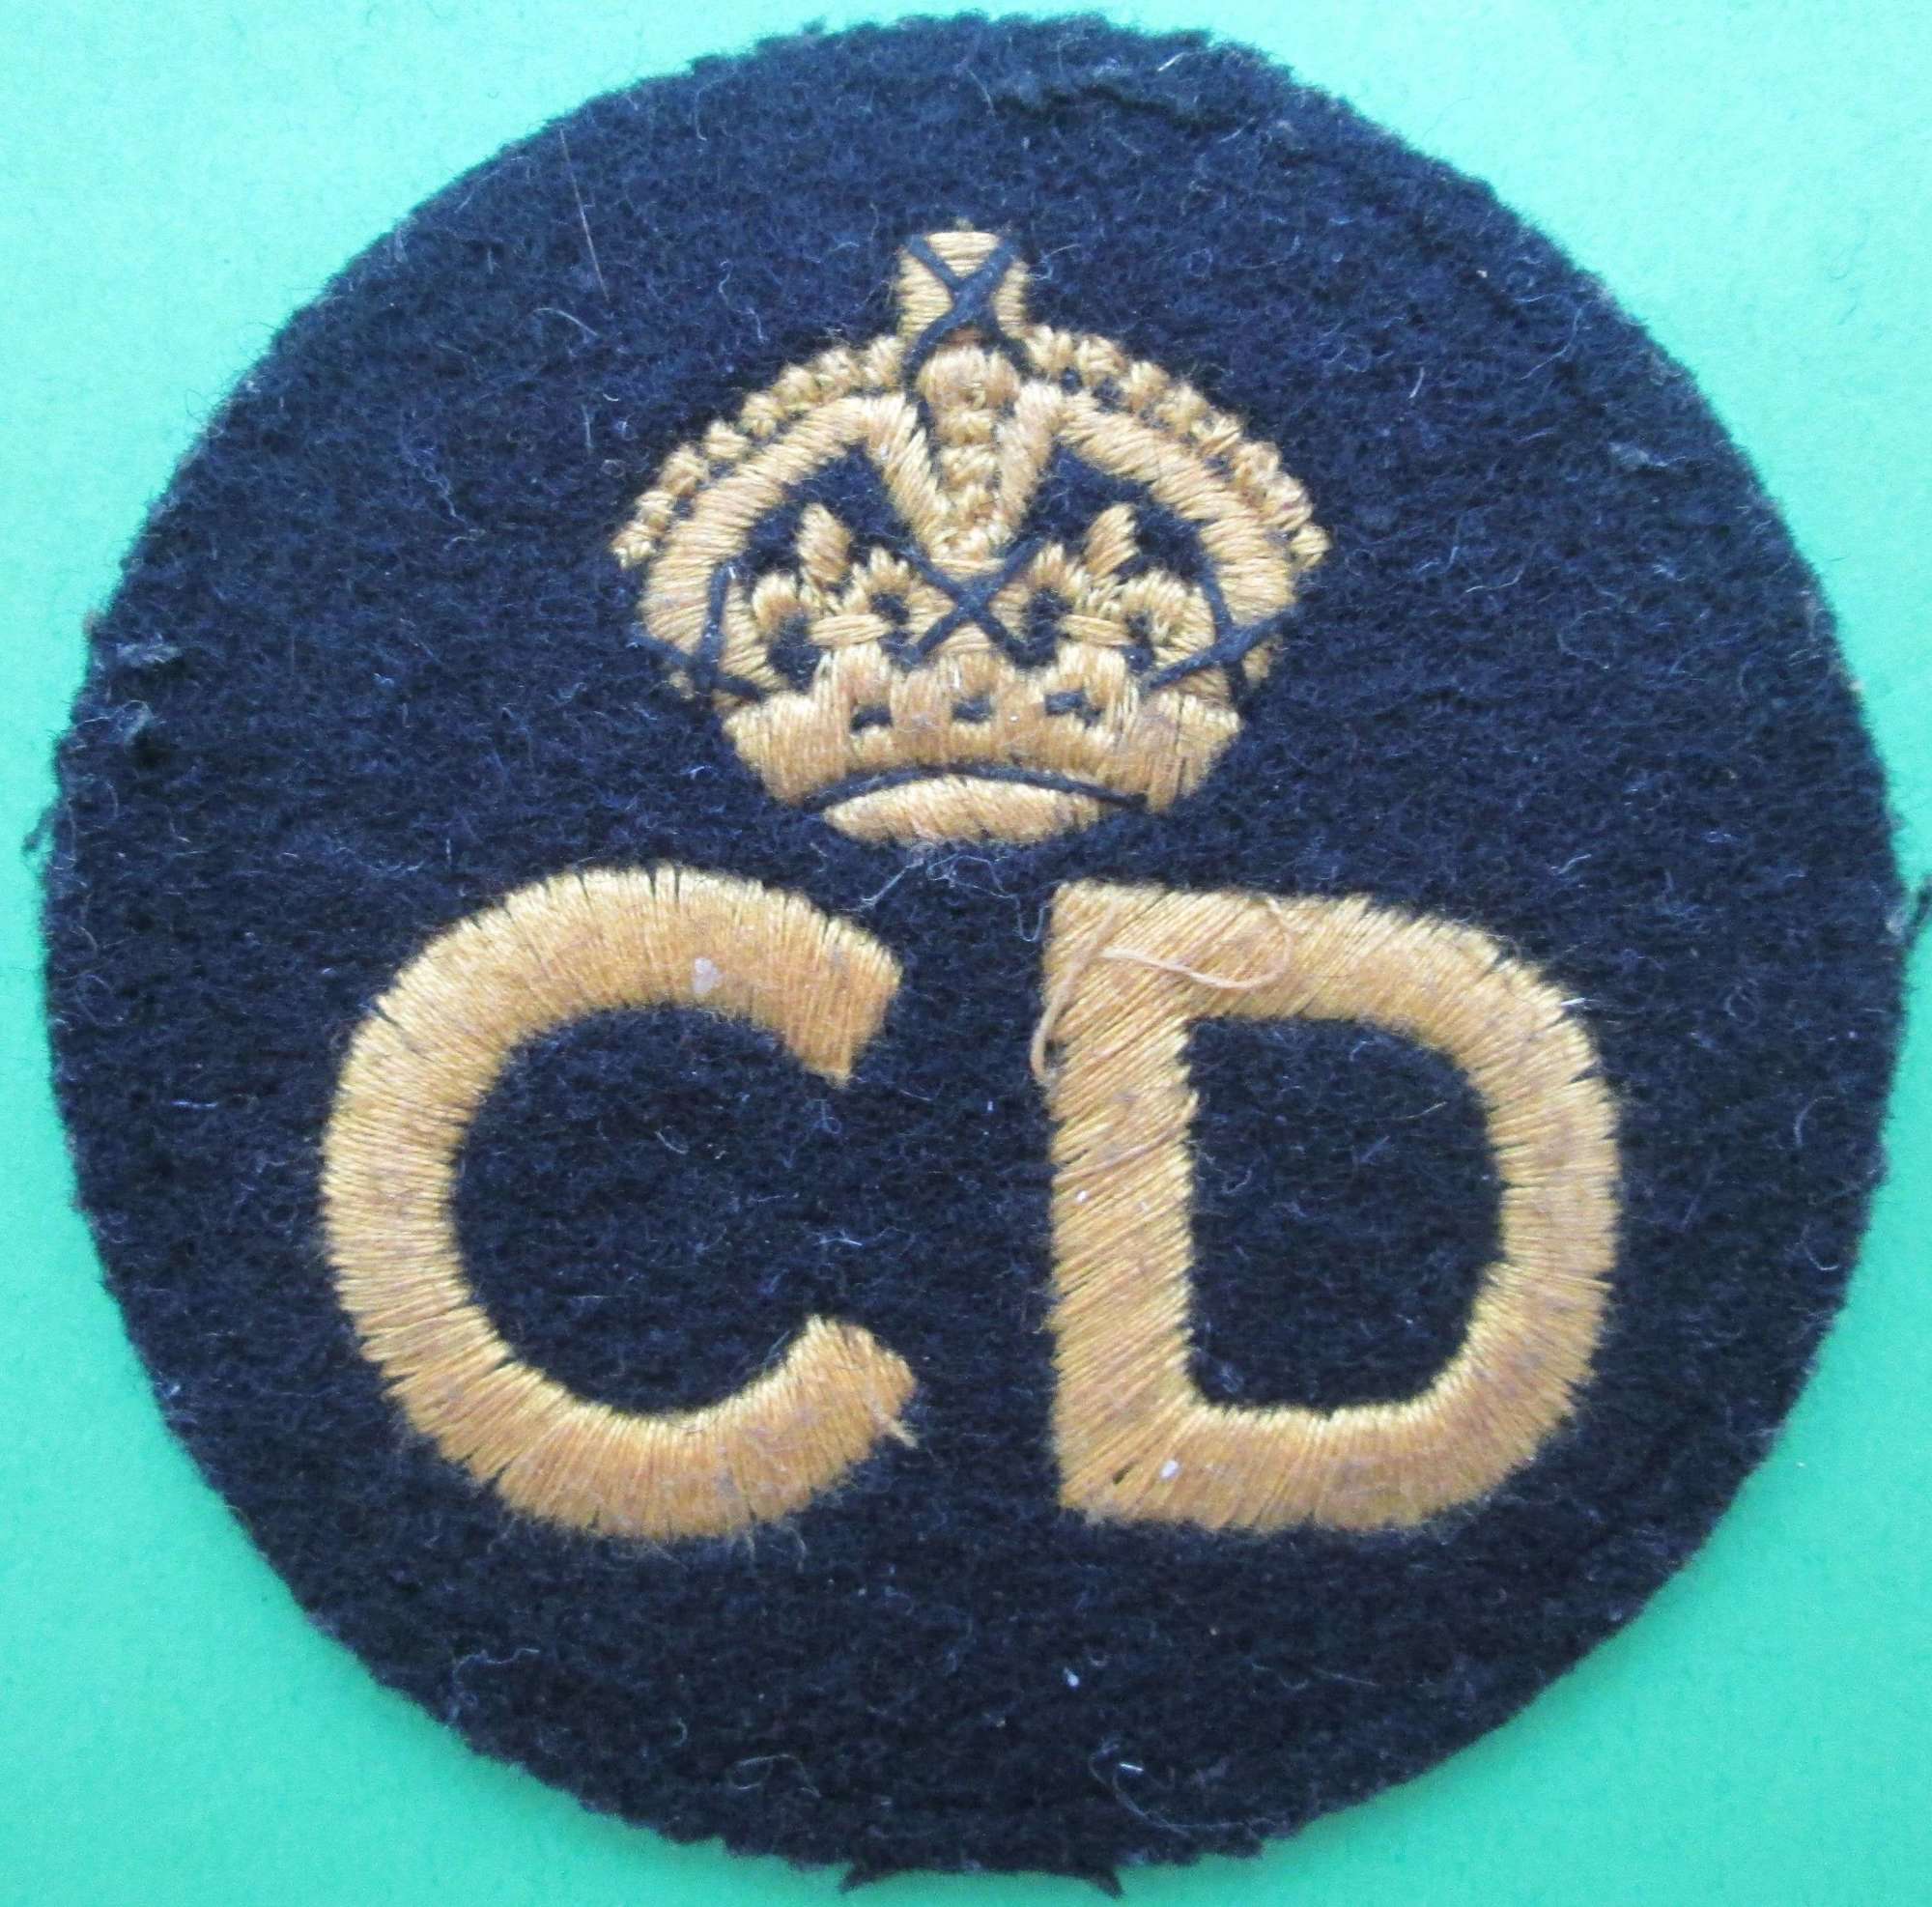 A WWII PERIOD CIVIL DEFENCE BREAST BADGE